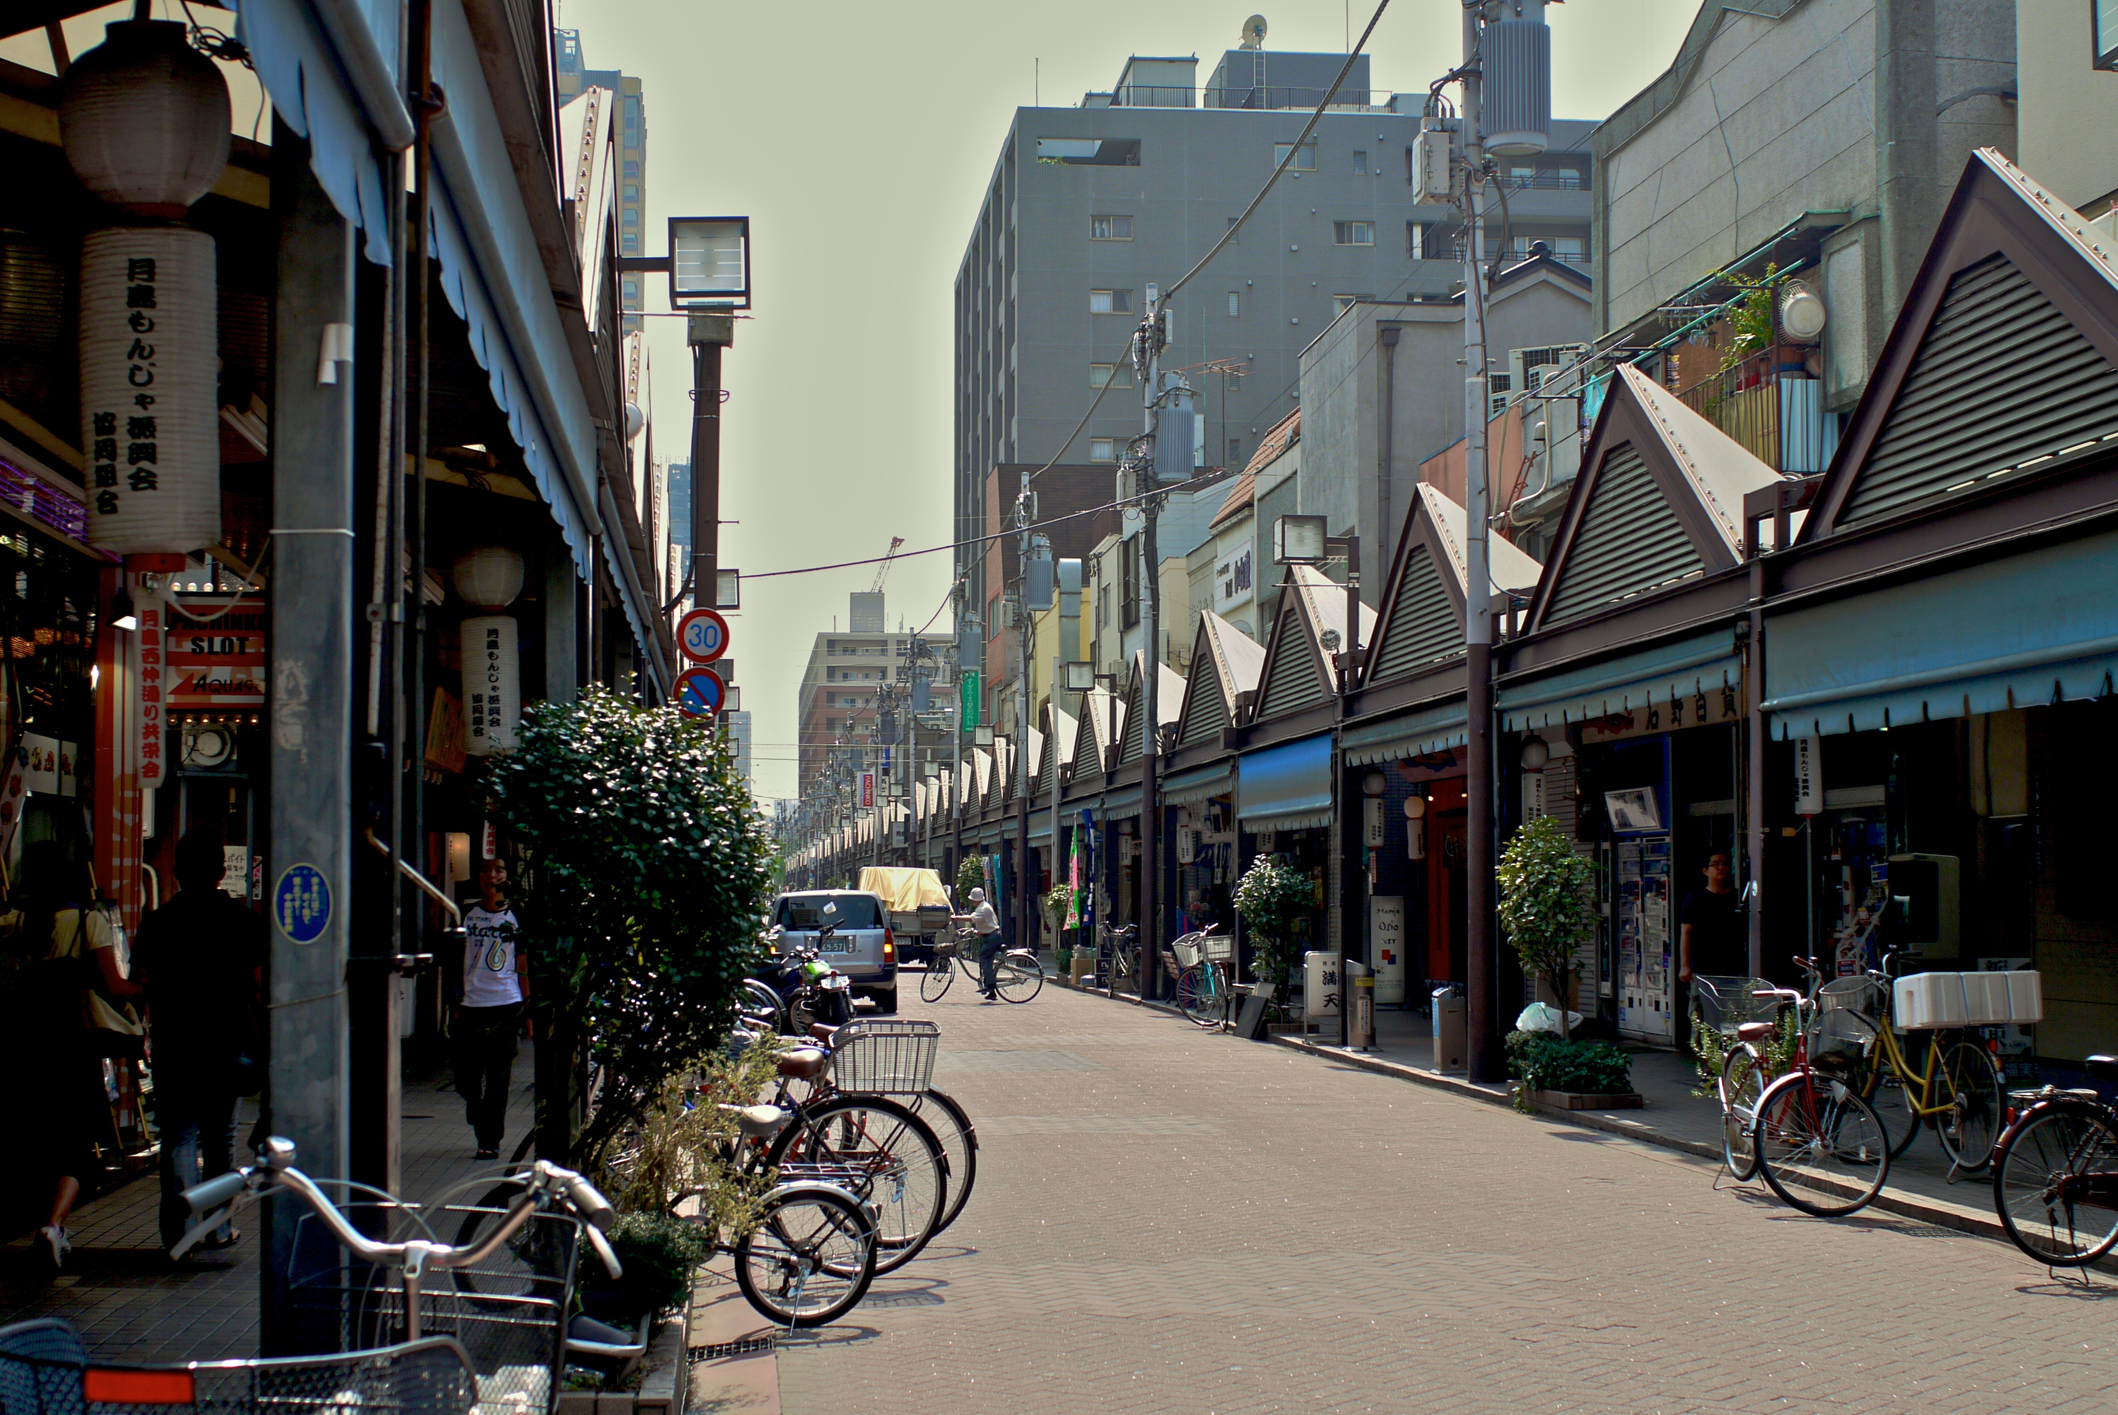 Street with bicycles and pedestrians, lined by single-story shops and a clear sky